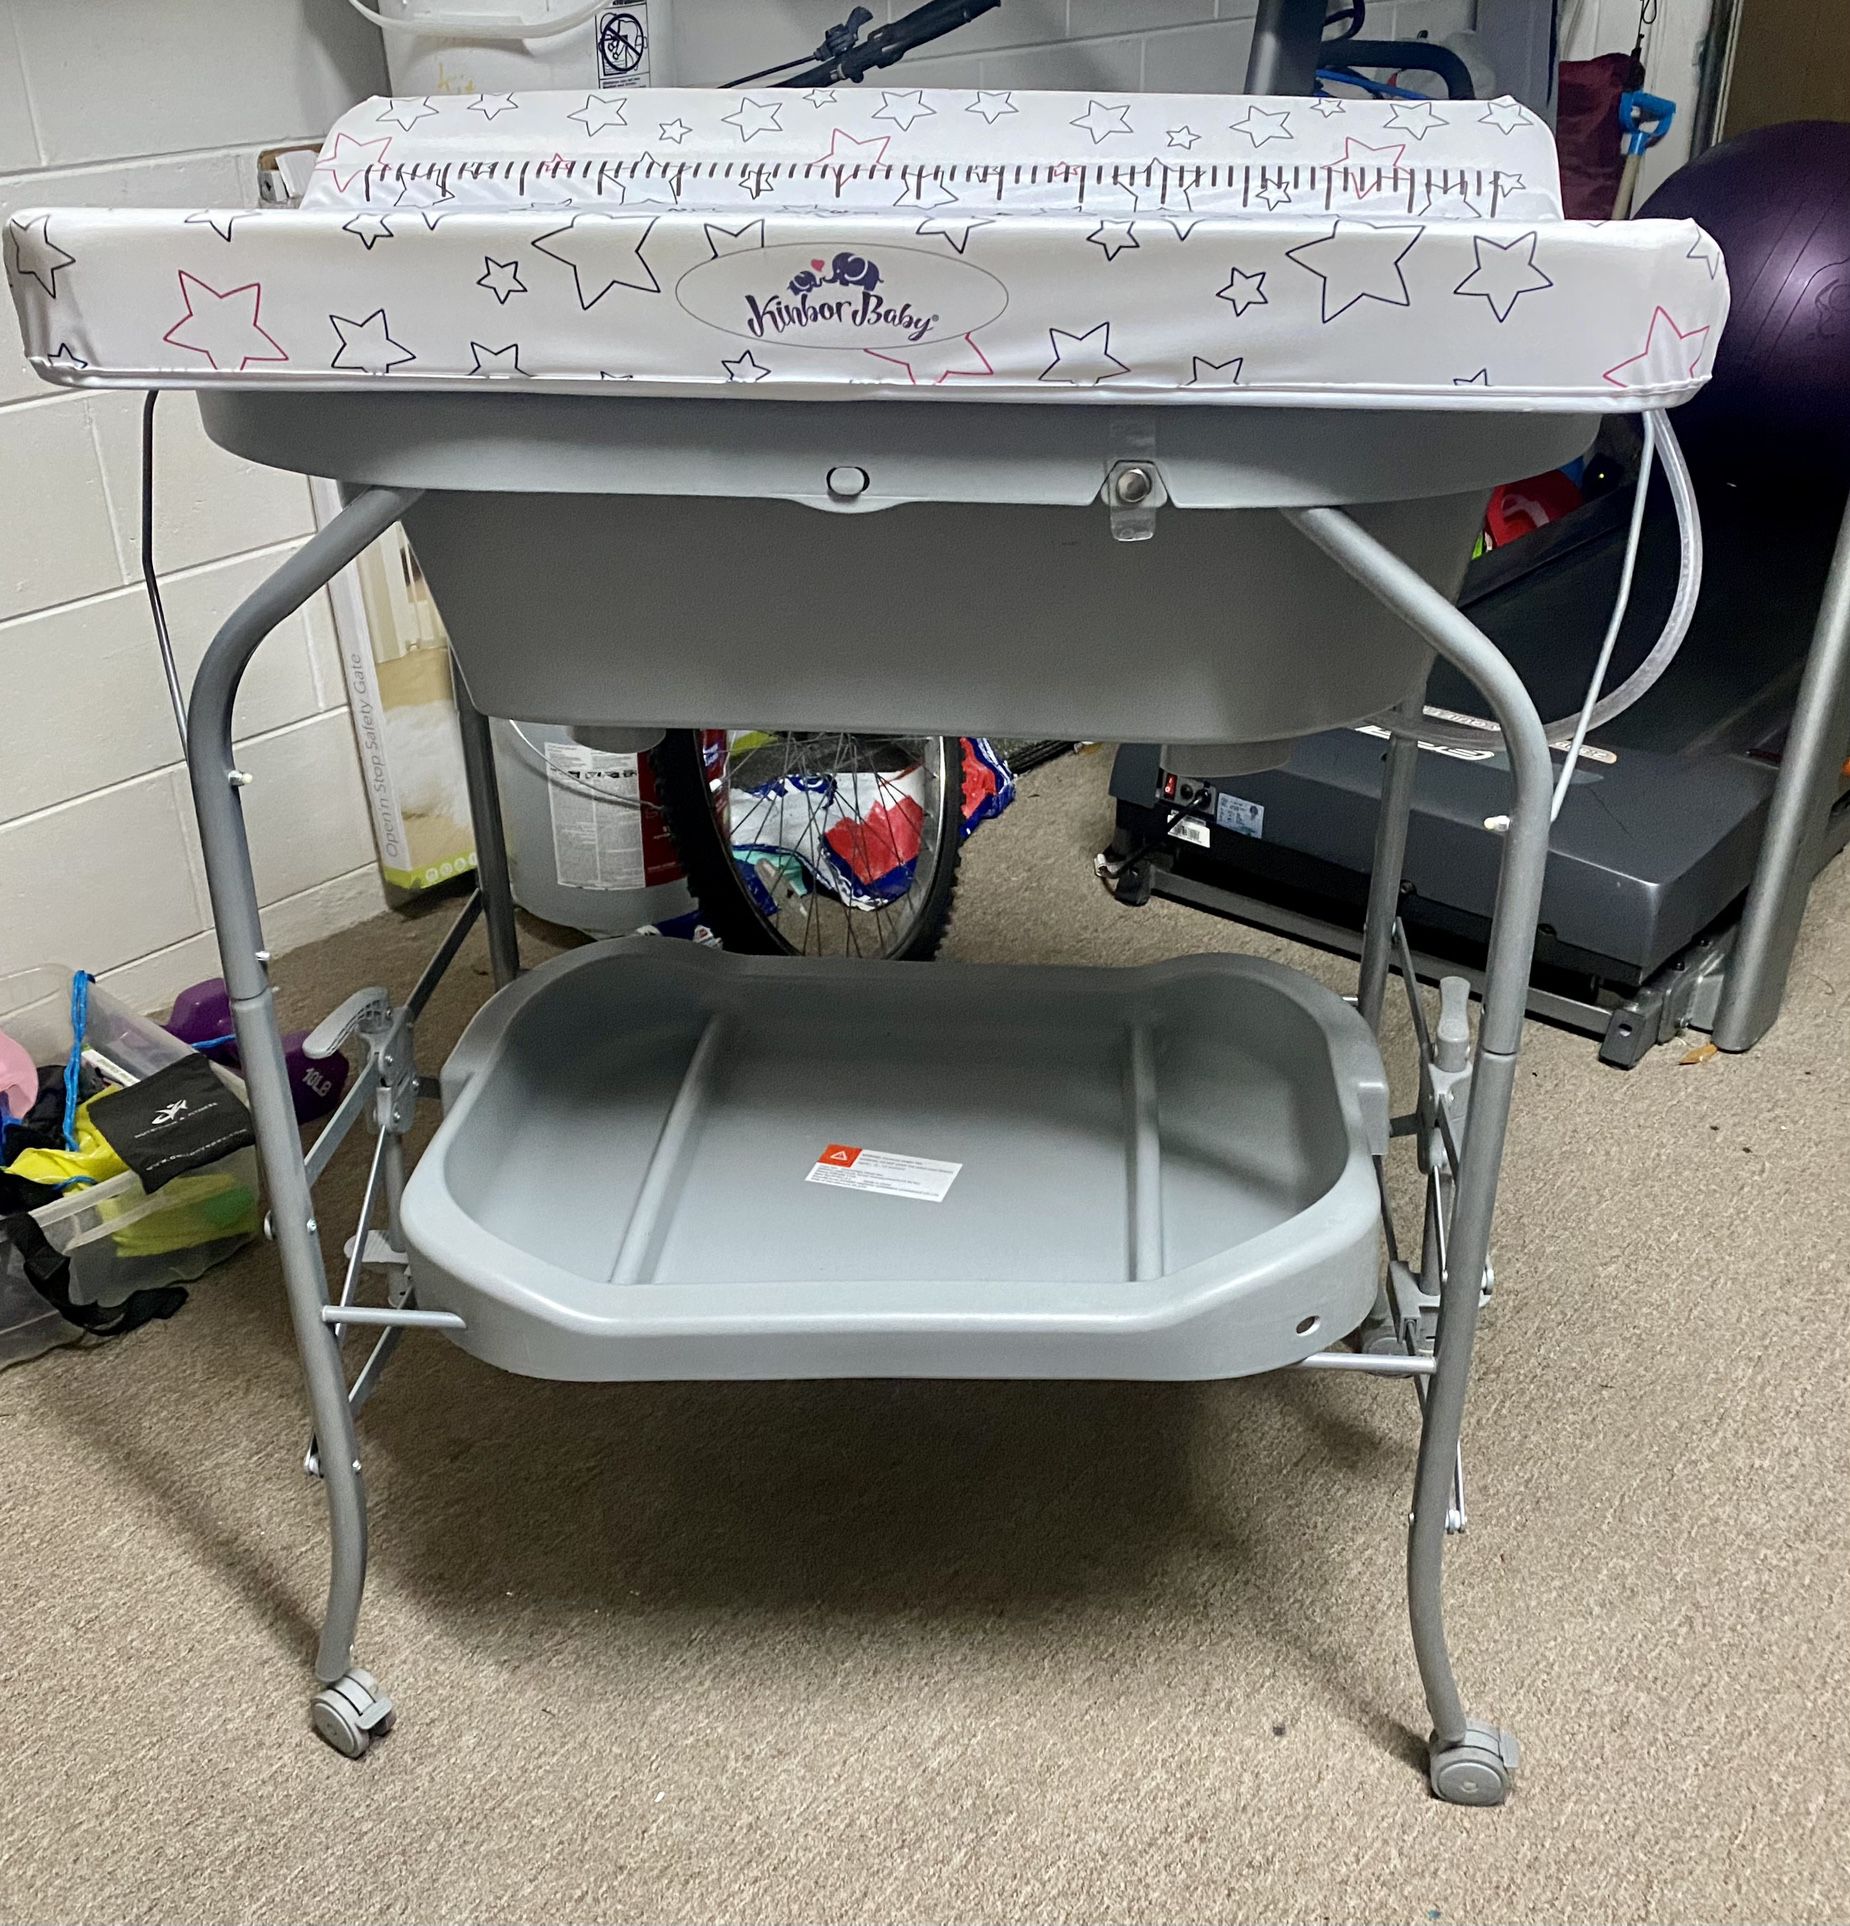 2 In 1 Baby Diaper Station With Bath Tub Unit 